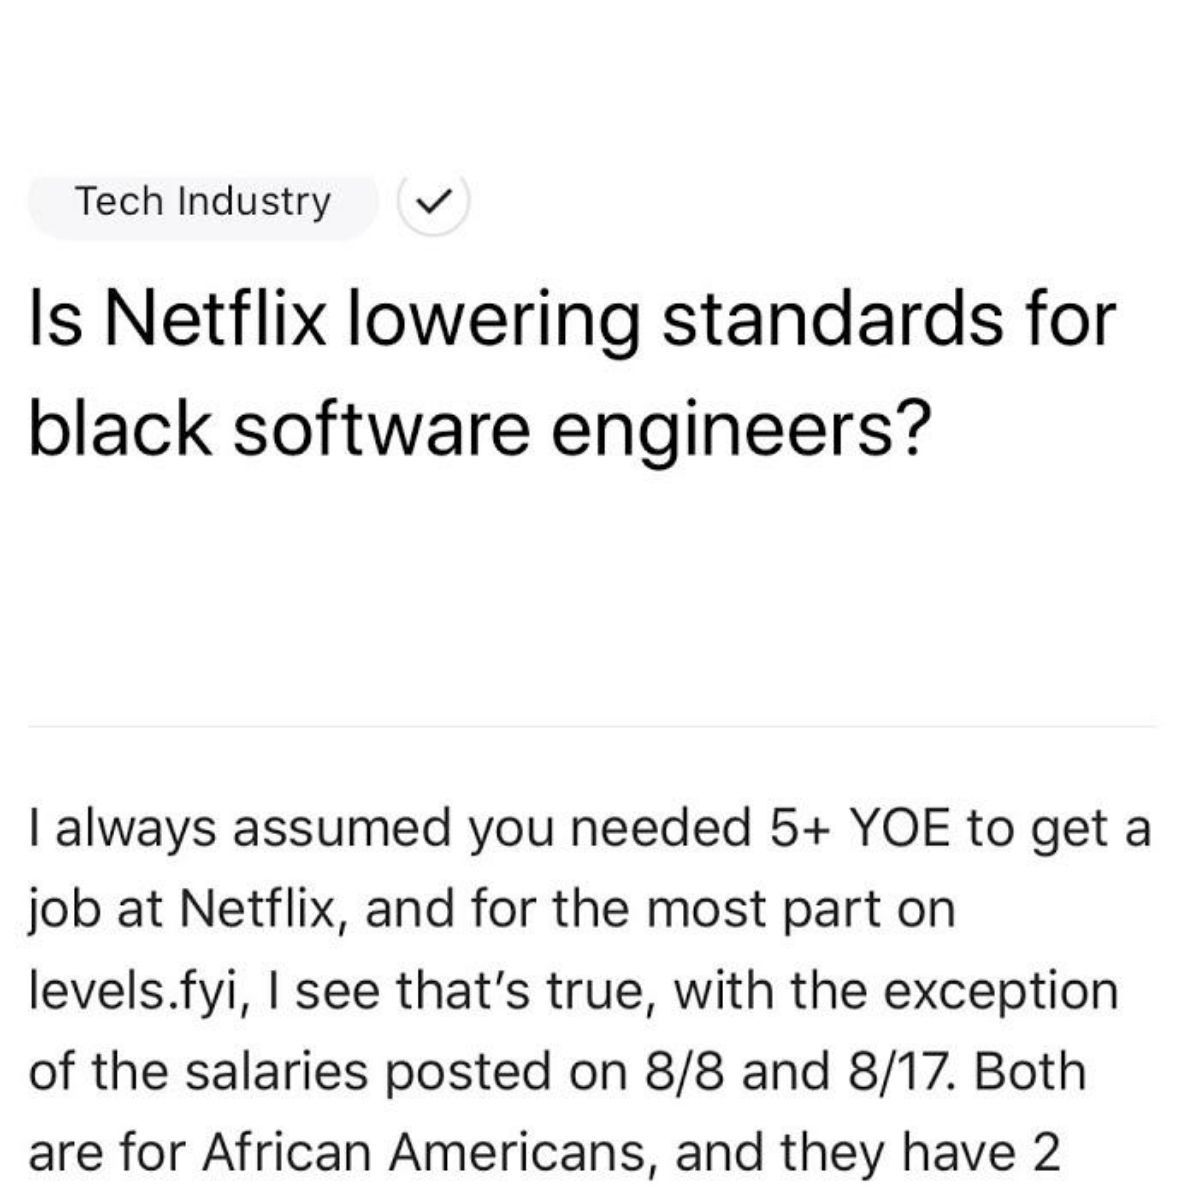 screenshot of question asked in a forum: "Is Netflix lowering standards for black software developers?"